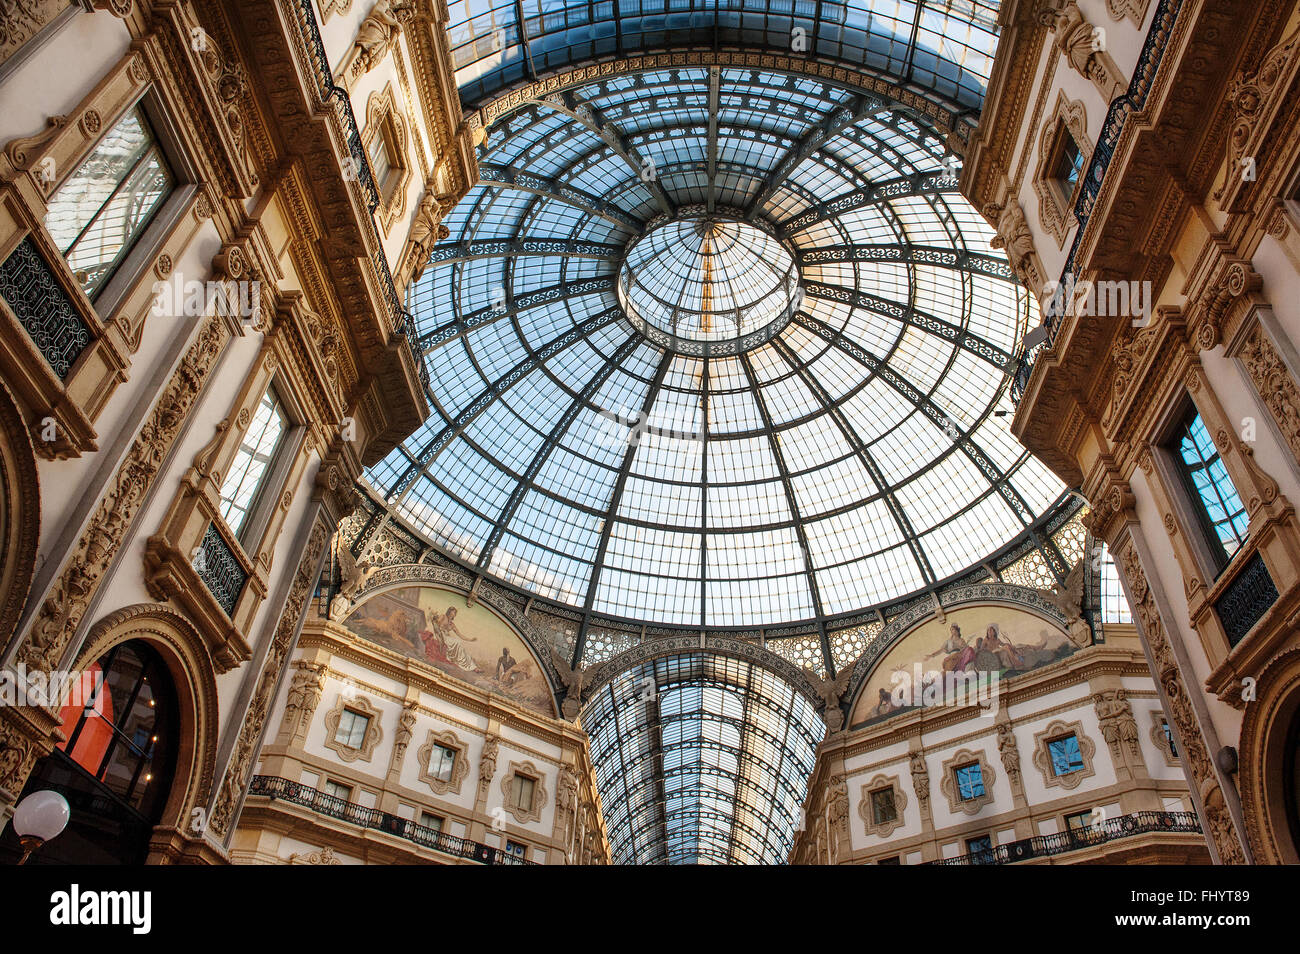 Low angle view toward circular domed ceiling and windows inside the Vittorio Emanuele Milan shopping mall interior Stock Photo